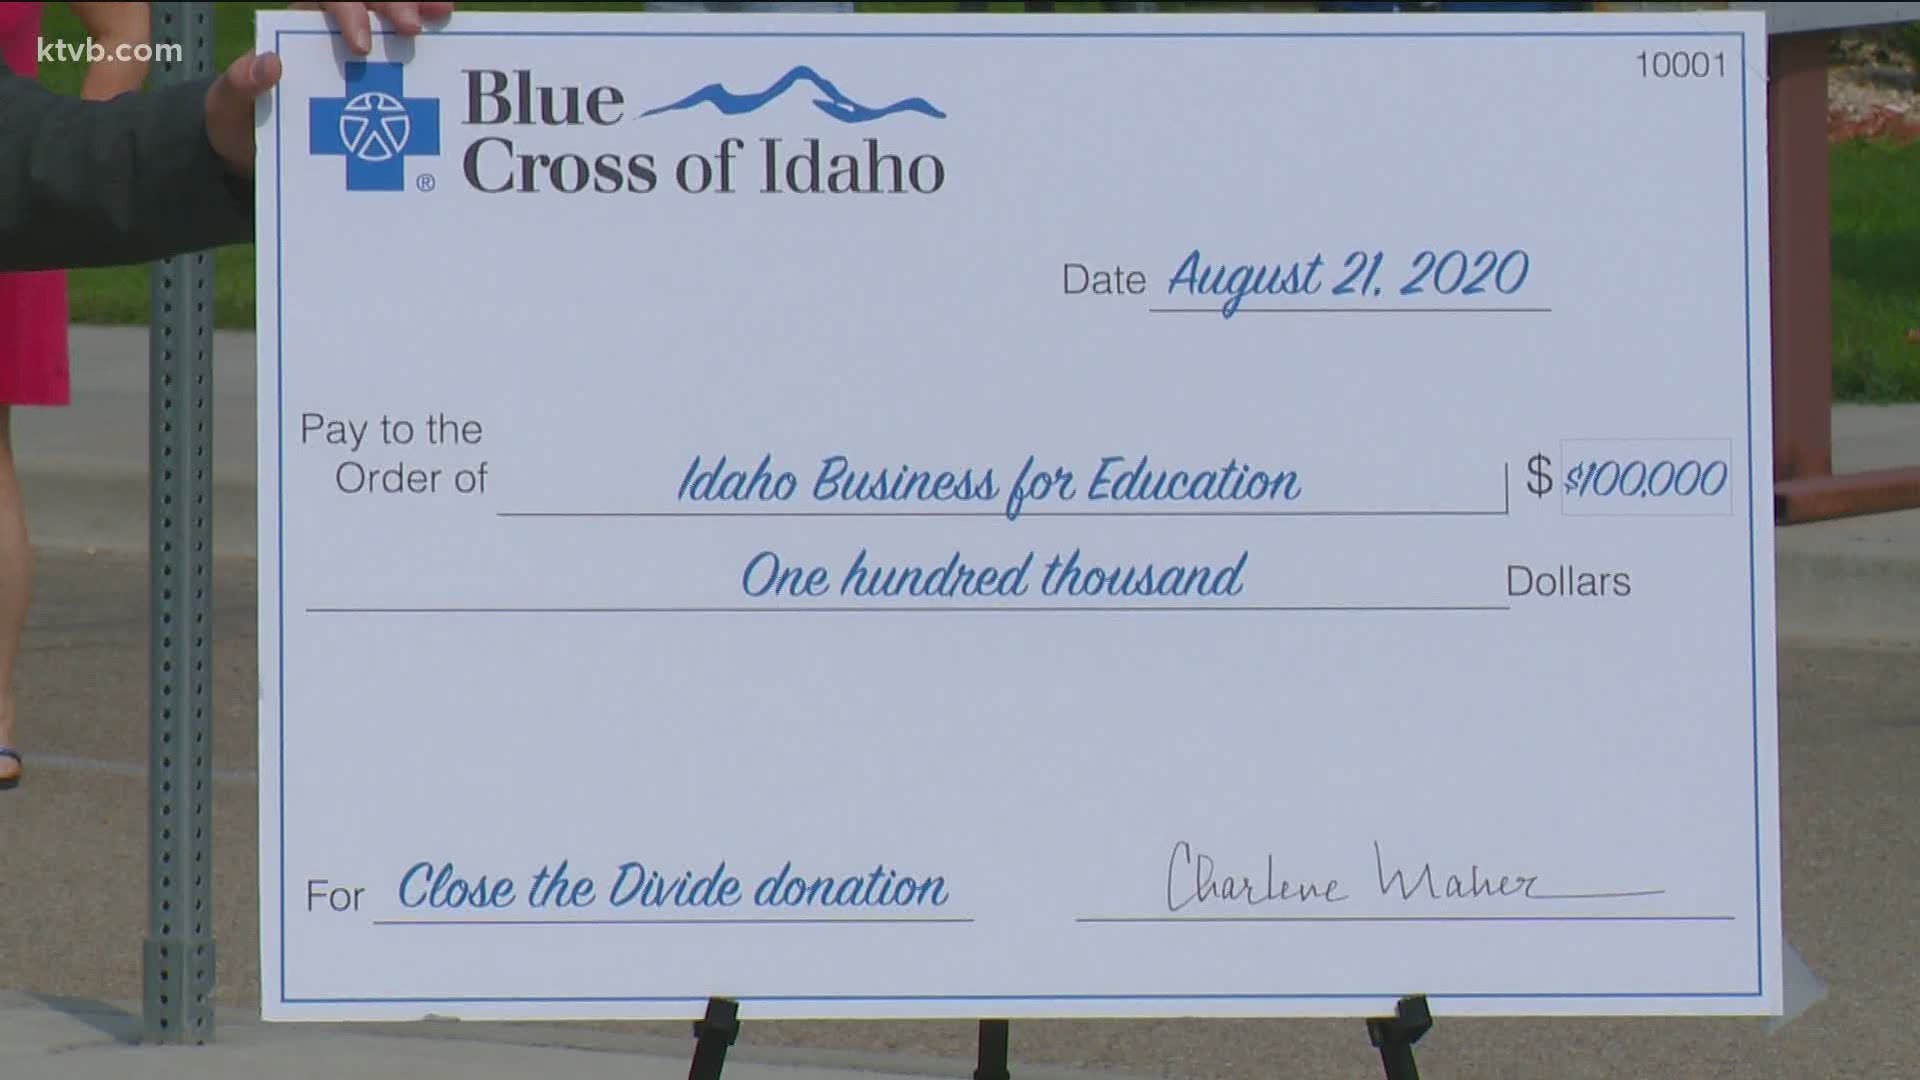 The money will be used to buy Idaho students laptops as they prepare for more remote learning to start the school year.